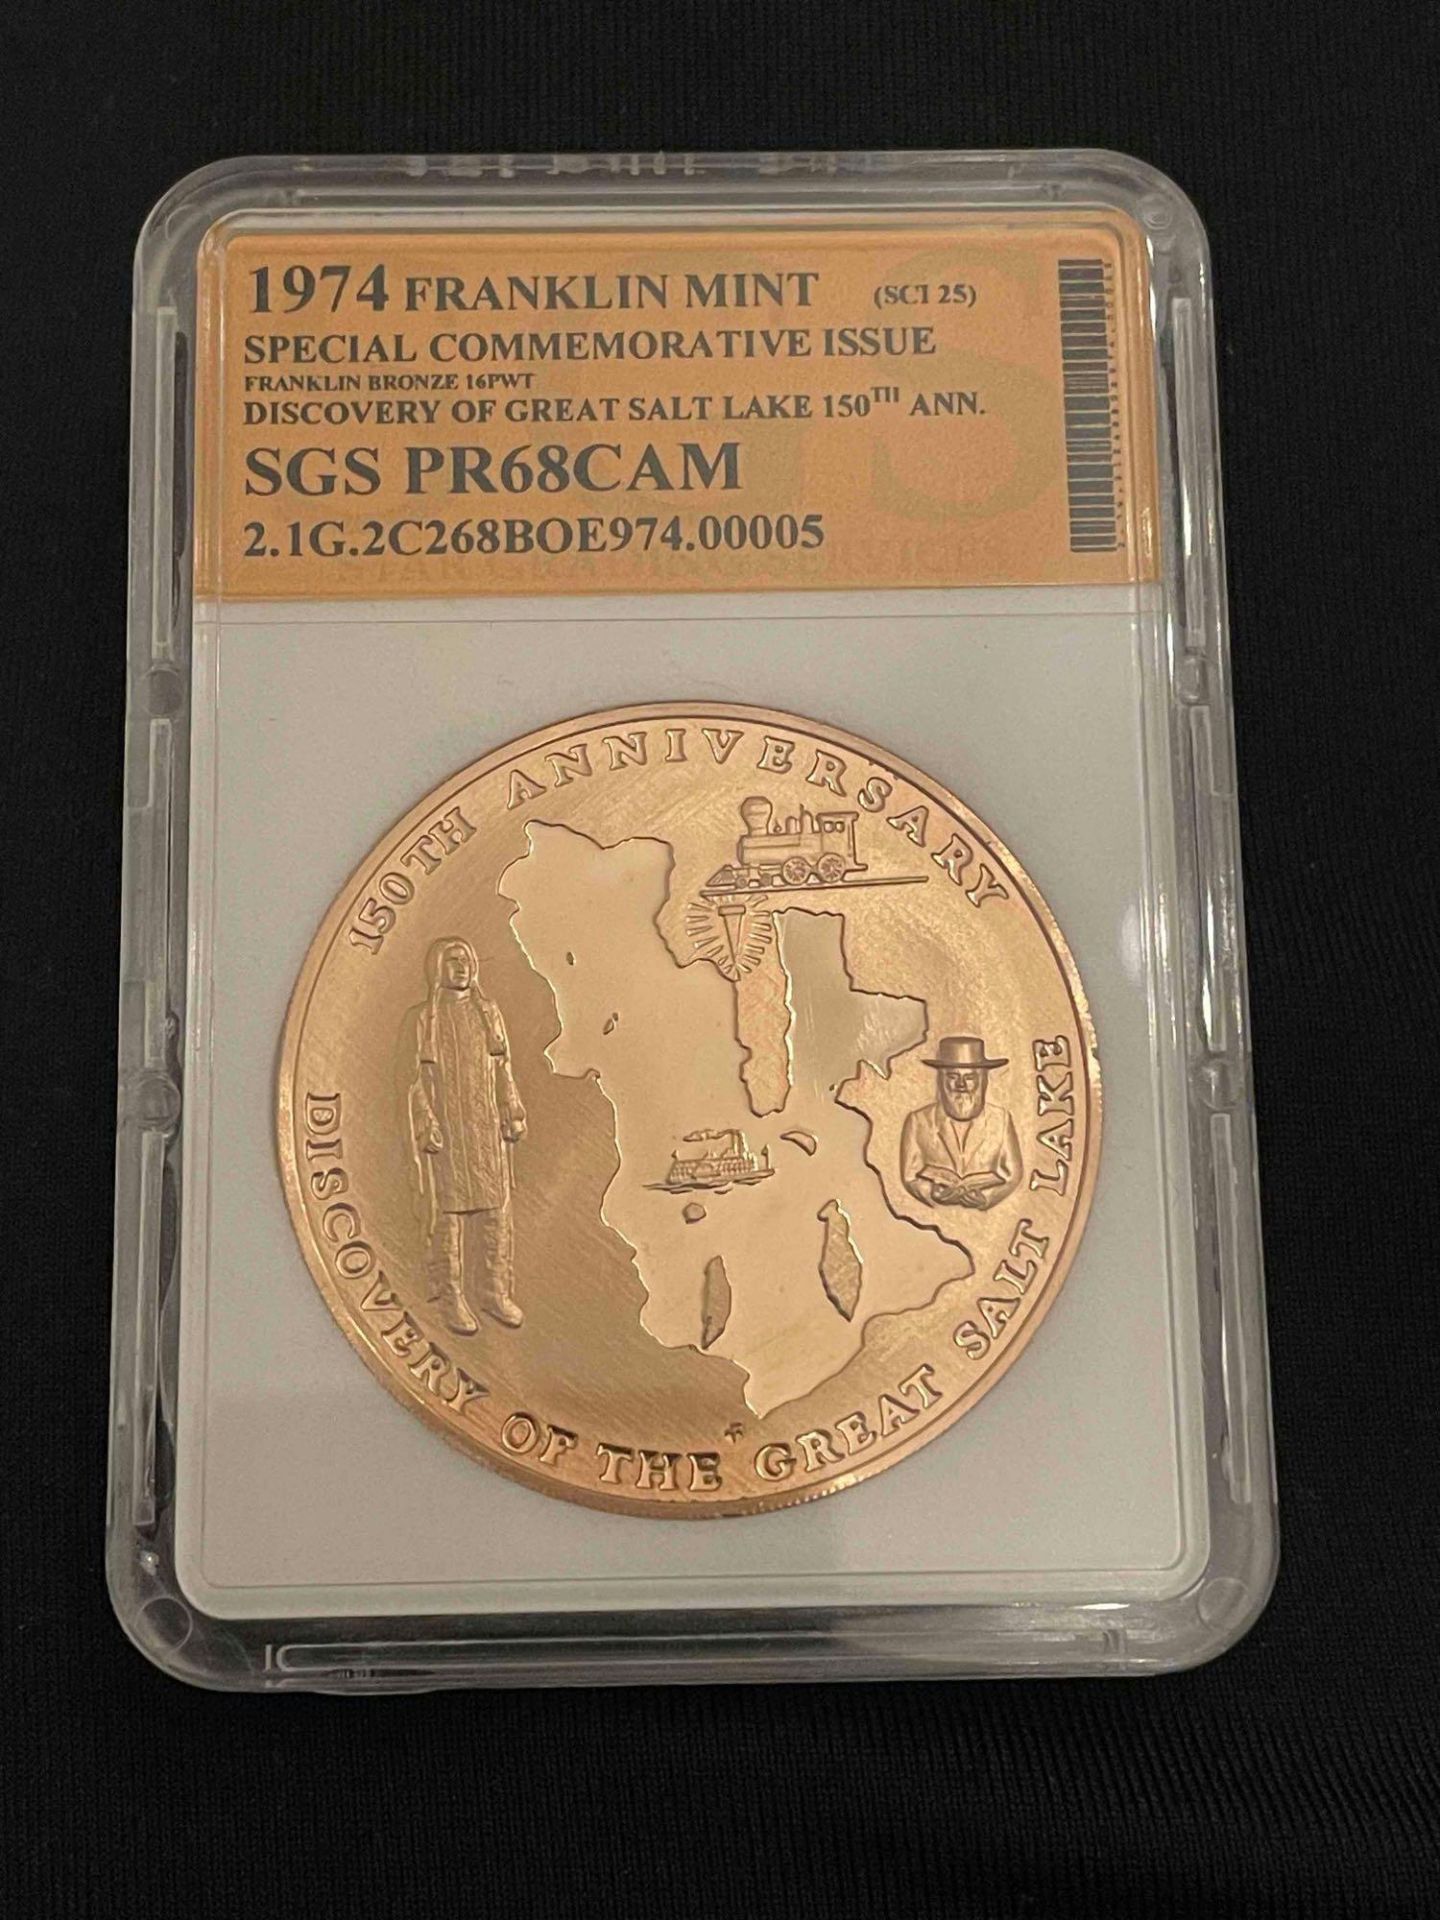 1974 Discovery of Great Salt Lake Coin